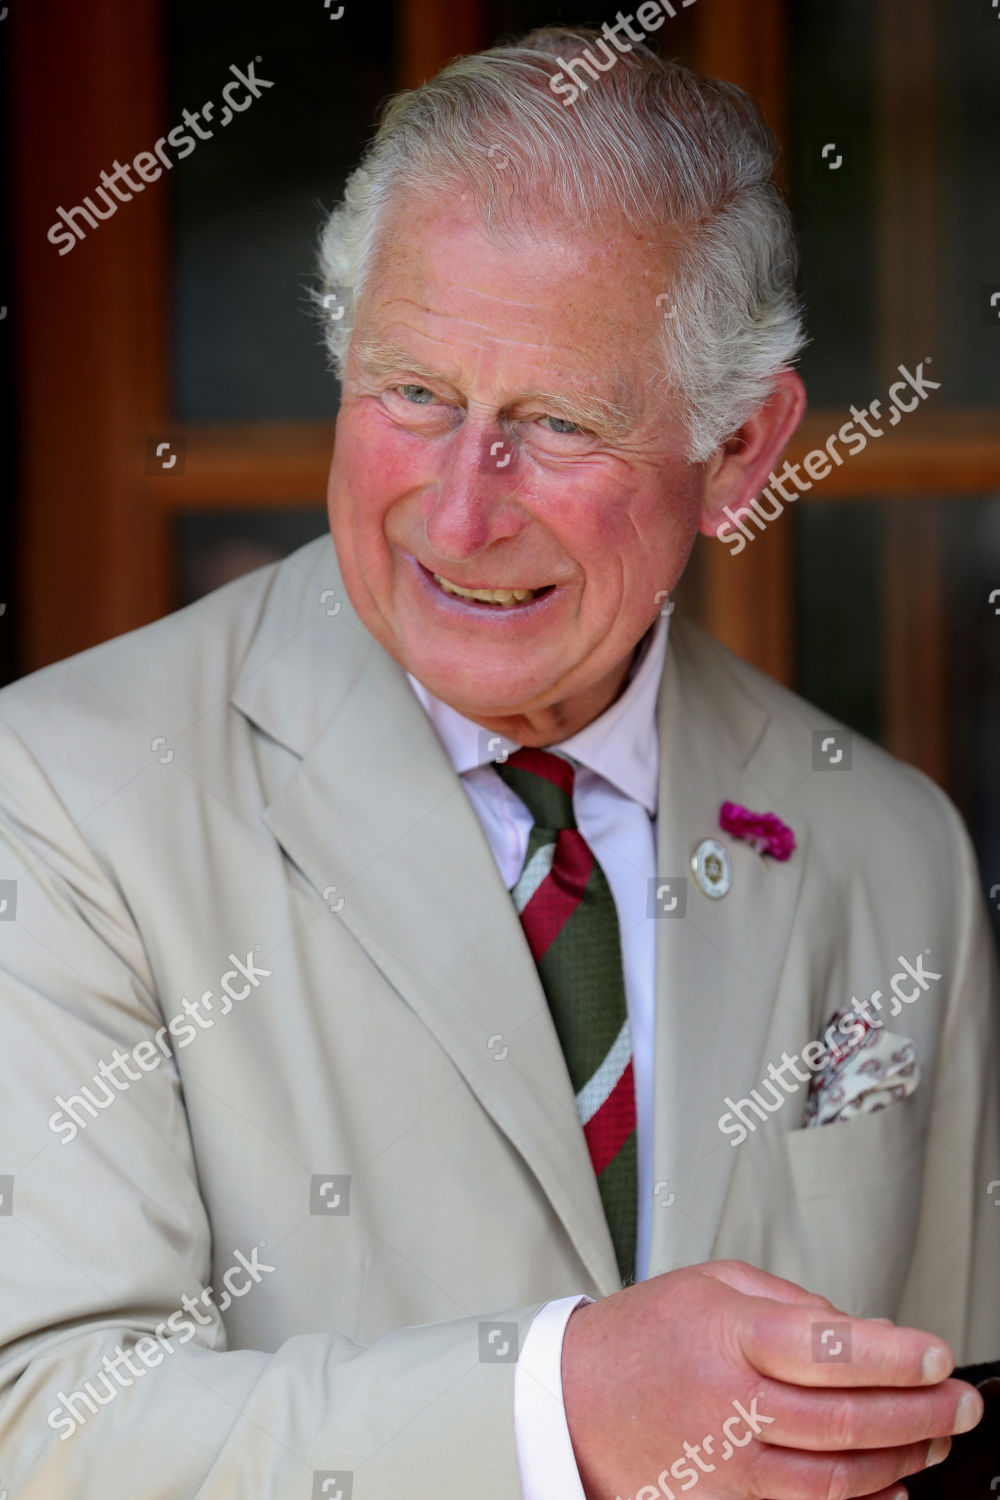 prince-charles-and-camilla-duchess-of-cornwall-visit-to-wales-uk-shutterstock-editorial-10327976al.jpg